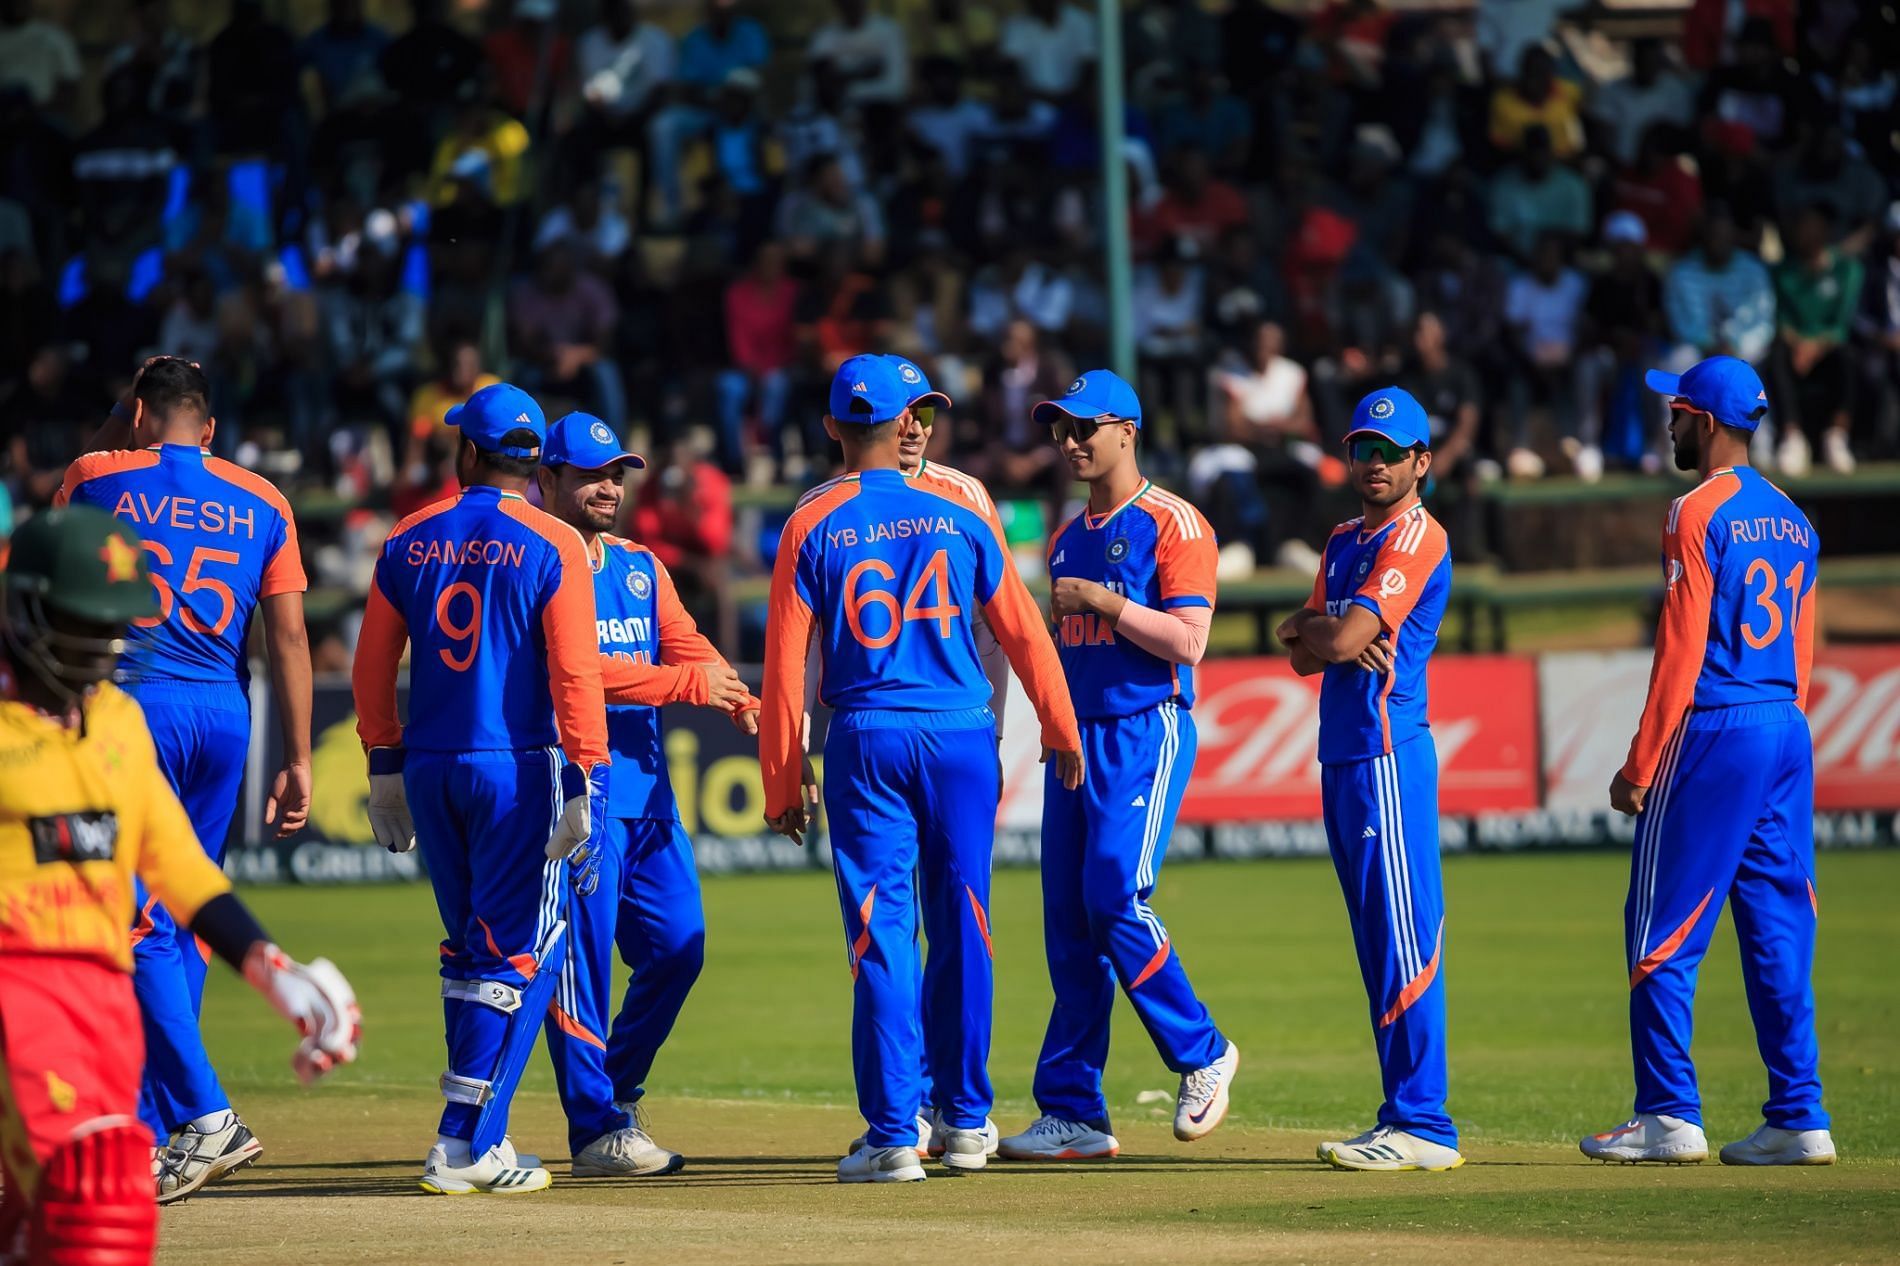 When is Team India's next match in the T20I series against Zimbabwe?